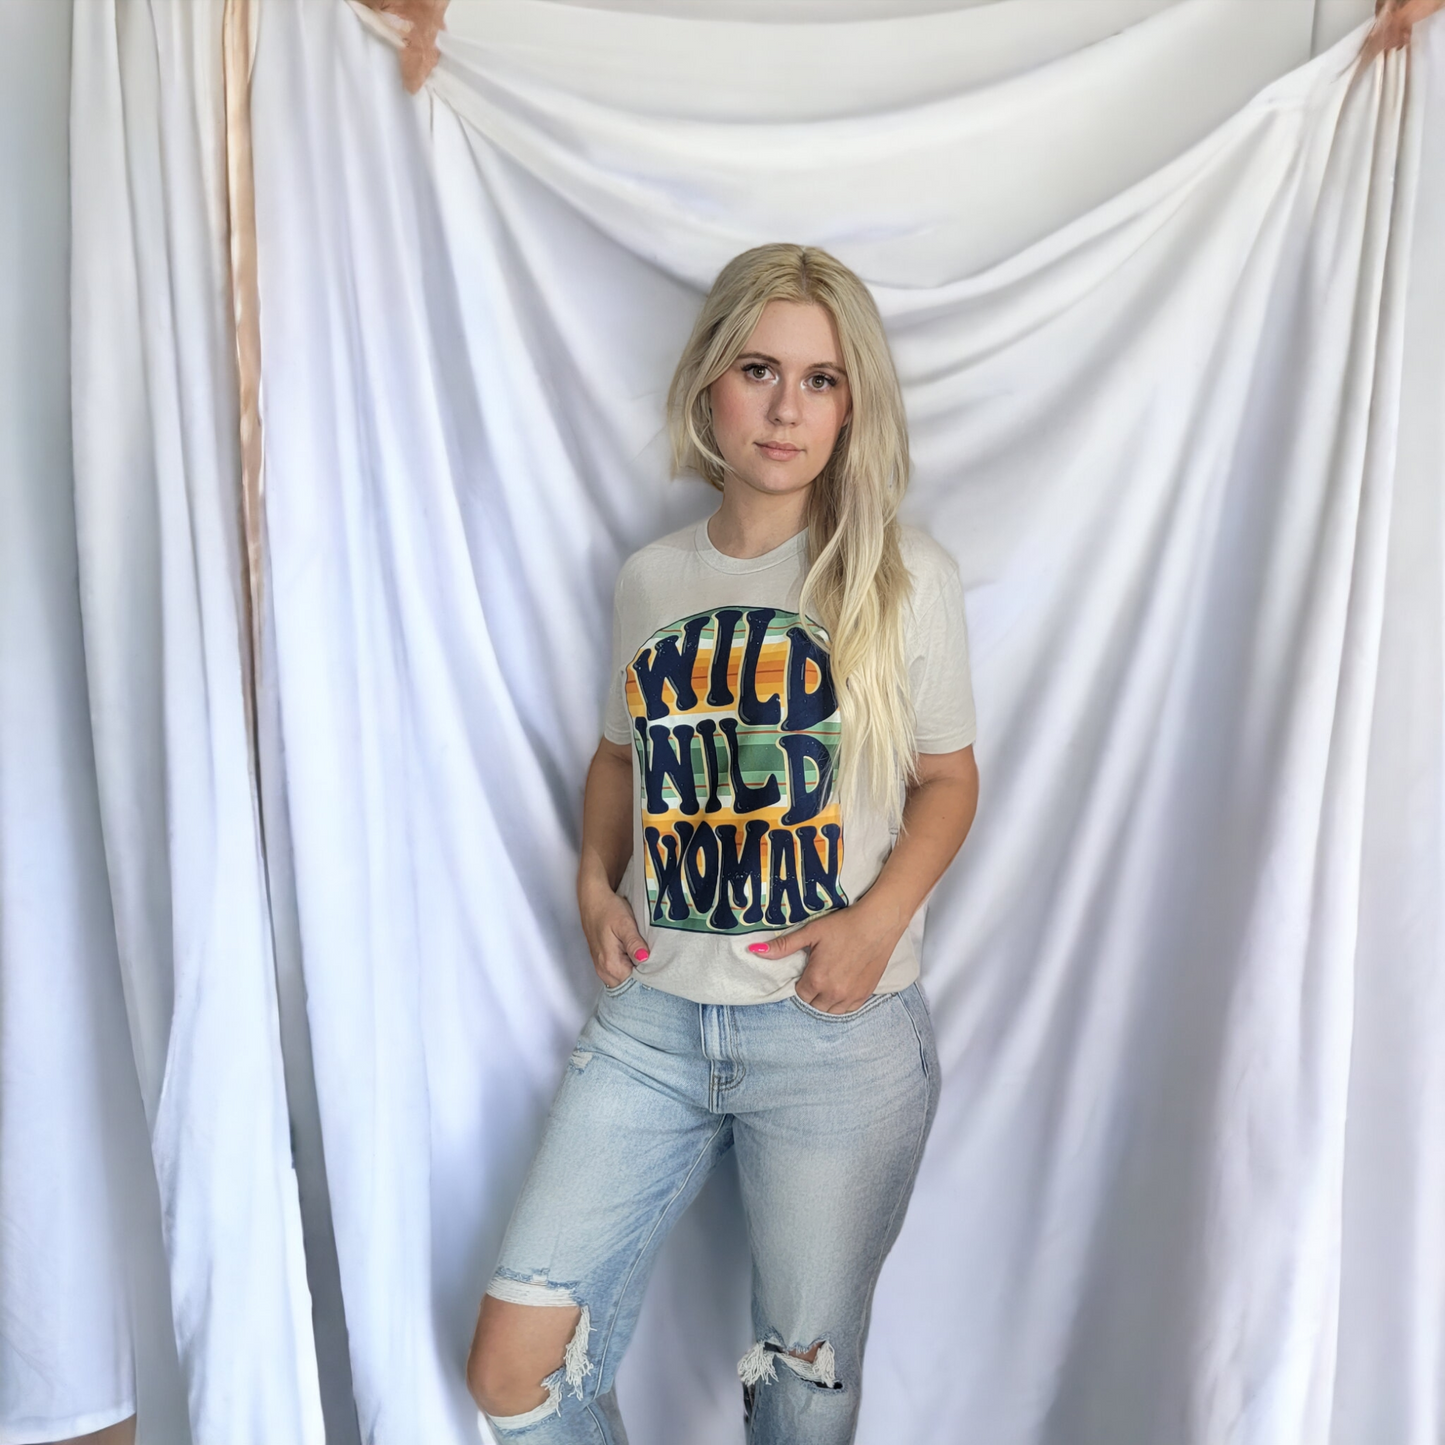 "Remember Who You Are" Wild Wild Woman Graphic Tee